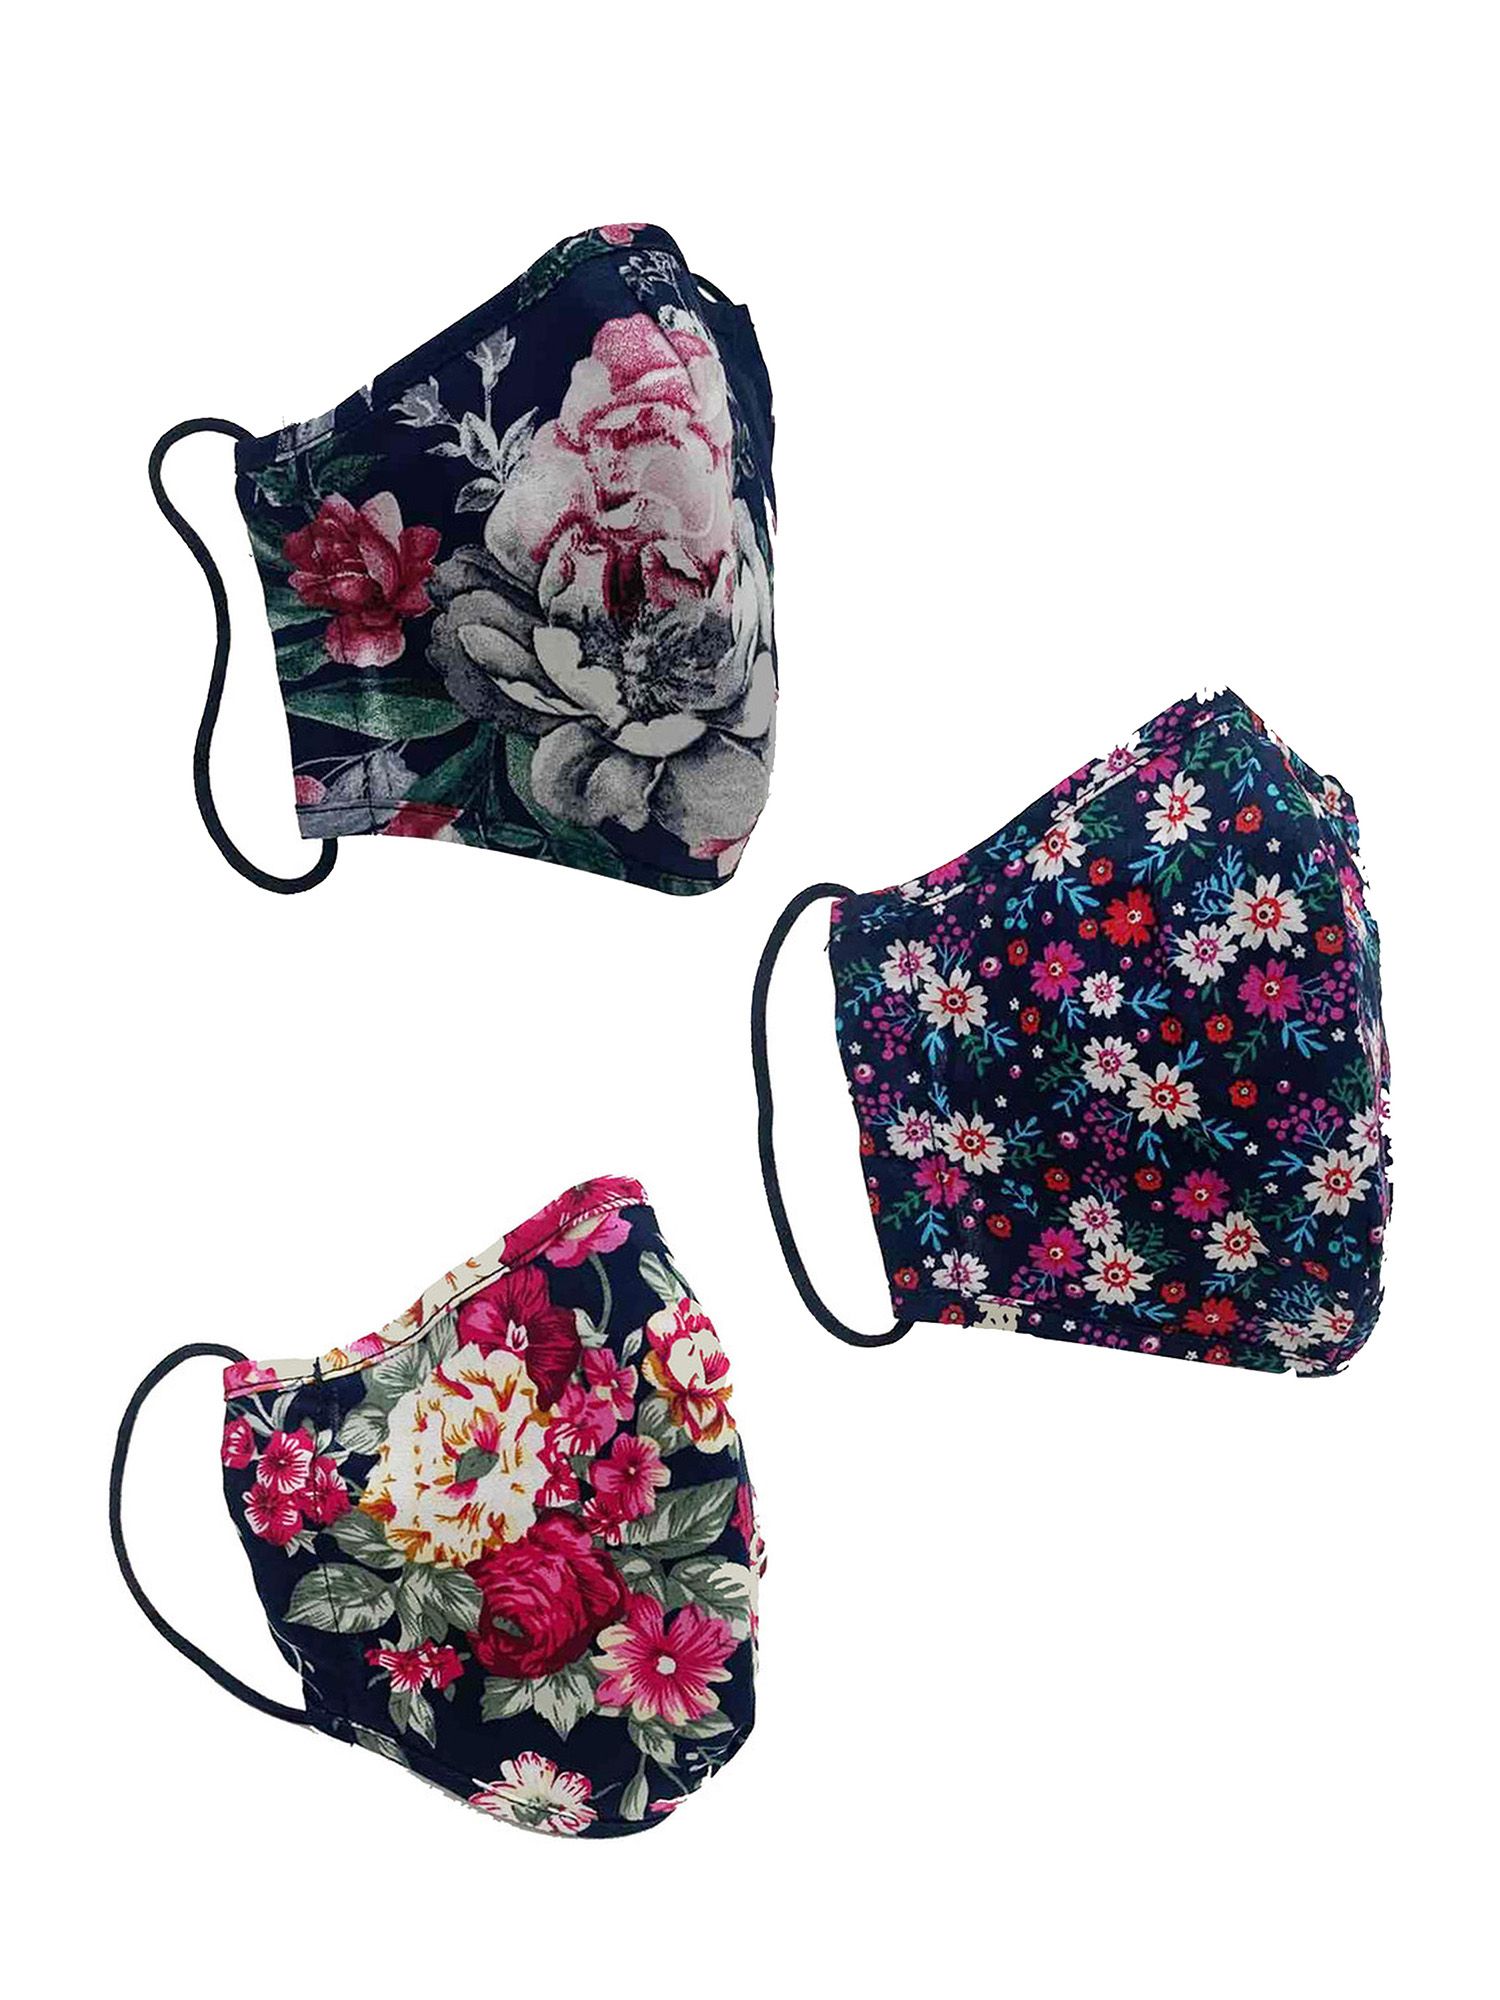 With a choice of three fun designs, our Flower Face Covering 3 pack is a versatile choice. Made from super-soft cotton, each face covering is cut from the ends of our fabric rolls, so they are sustainable and kind to the planet. Please remember these are non-medical masks and not PPE. Wash your hands before and after putting on the covering. One Pound from each covering is donated to Sufra, a charity that supports and provides food for people in extreme poverty.